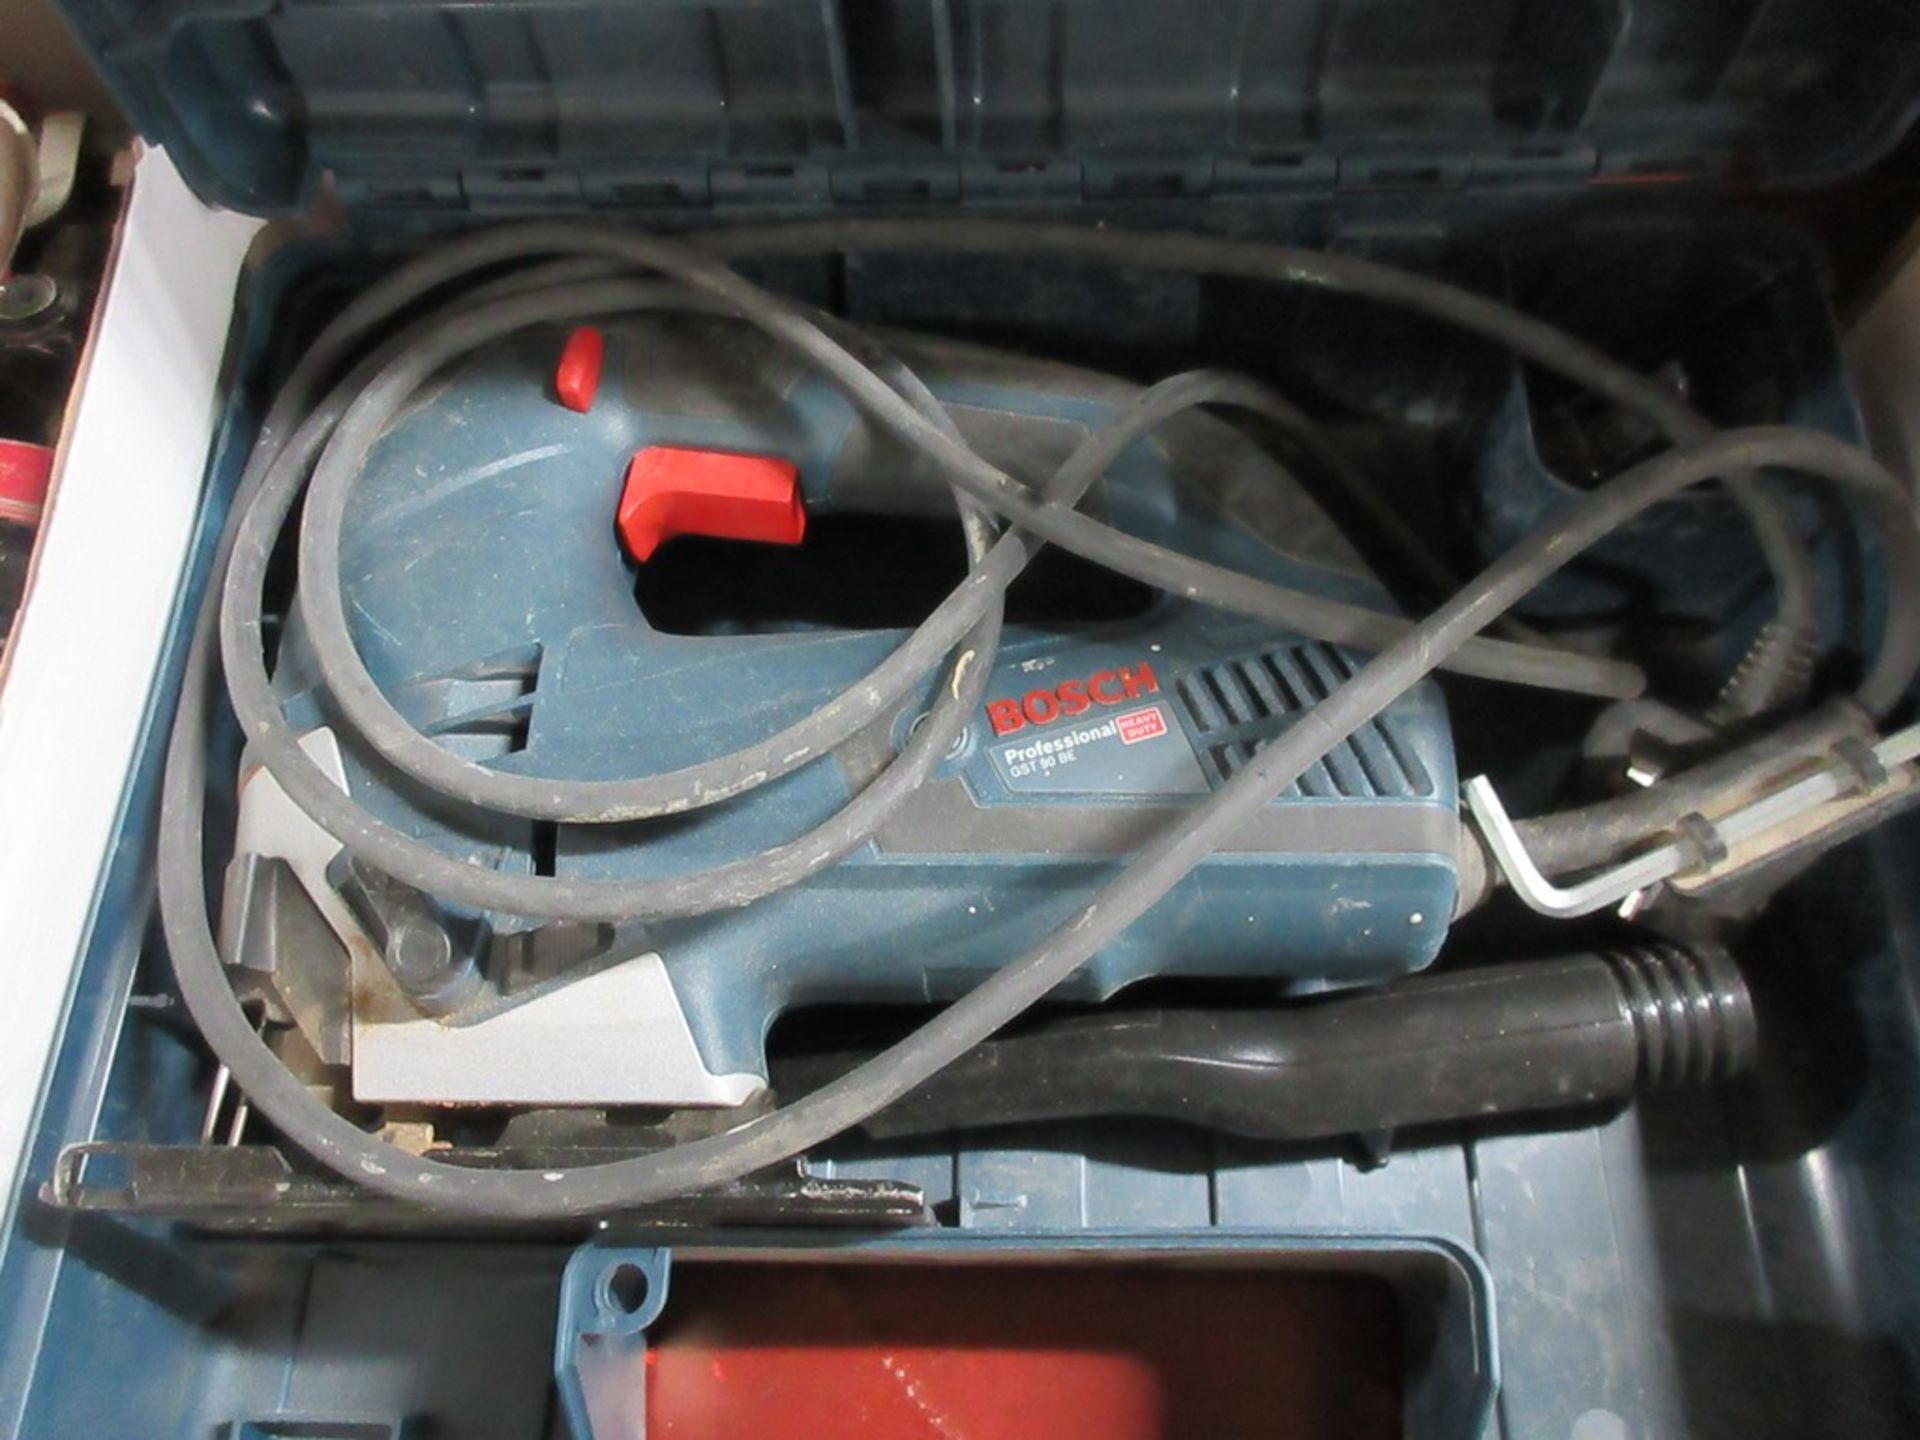 Bosch 2 x power tools including Bosch Professional GST 90BE jigsaw, 240v and Bosch GGW10E tapping d - Image 2 of 4